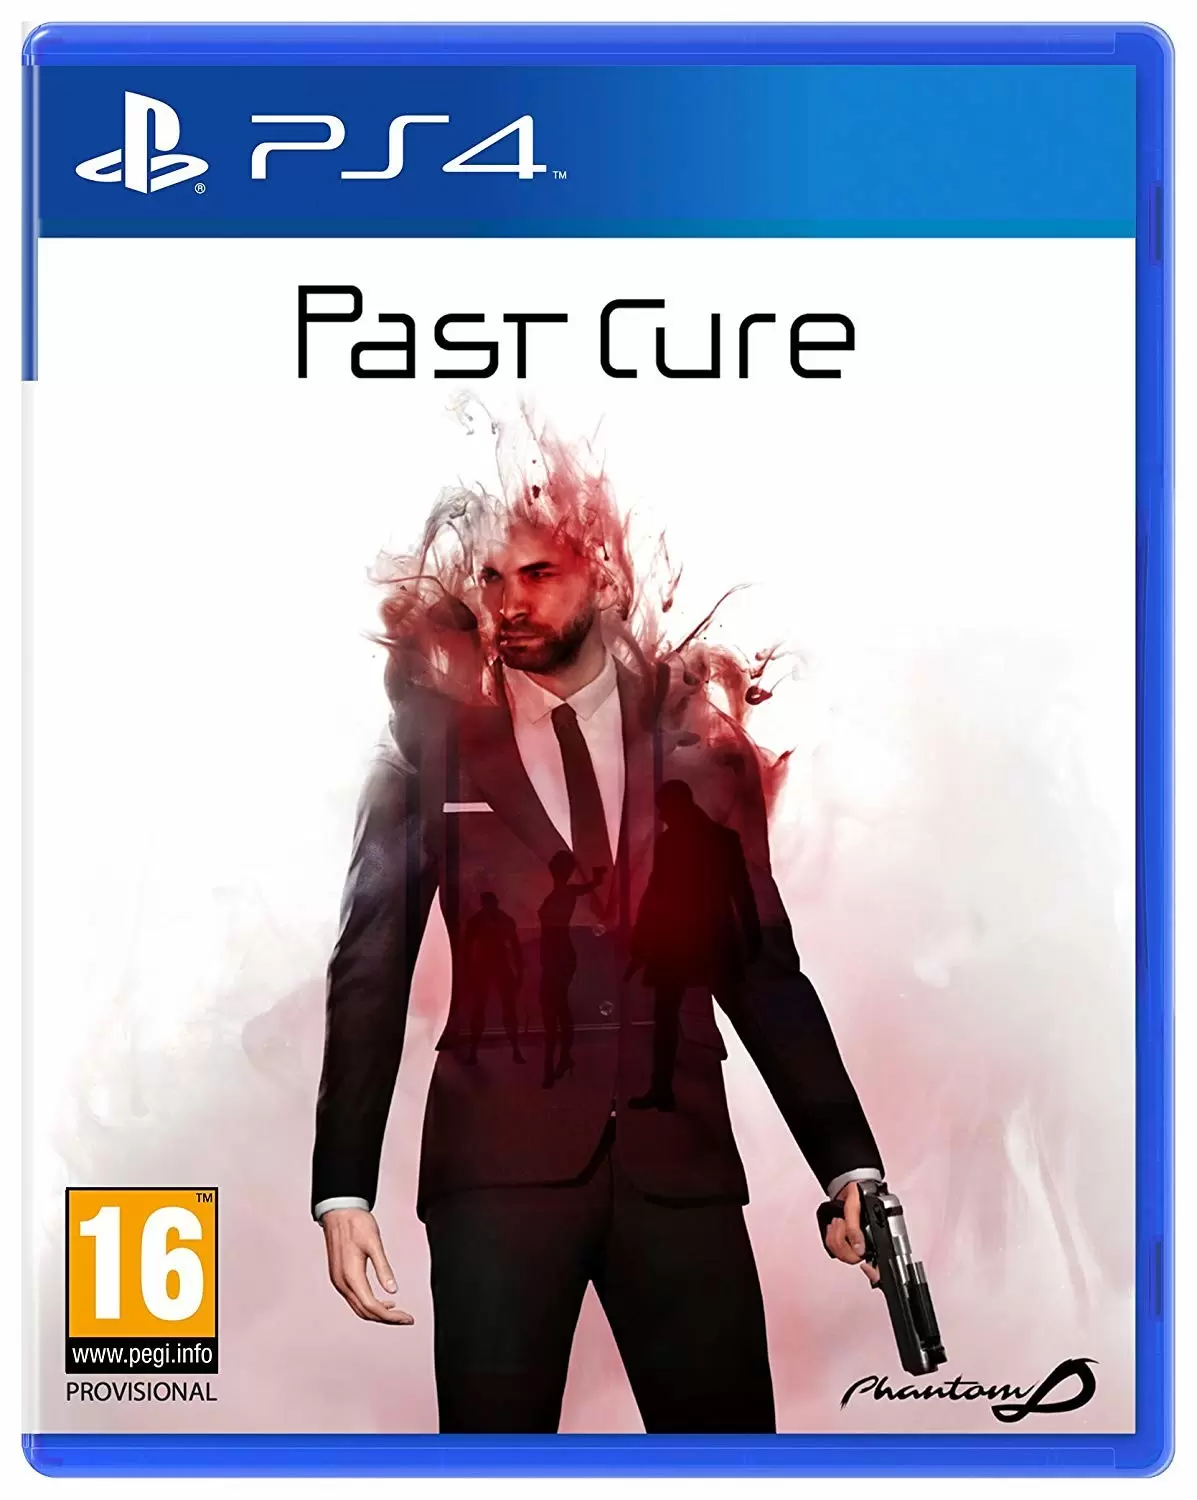 PS4 Games - Past Cure